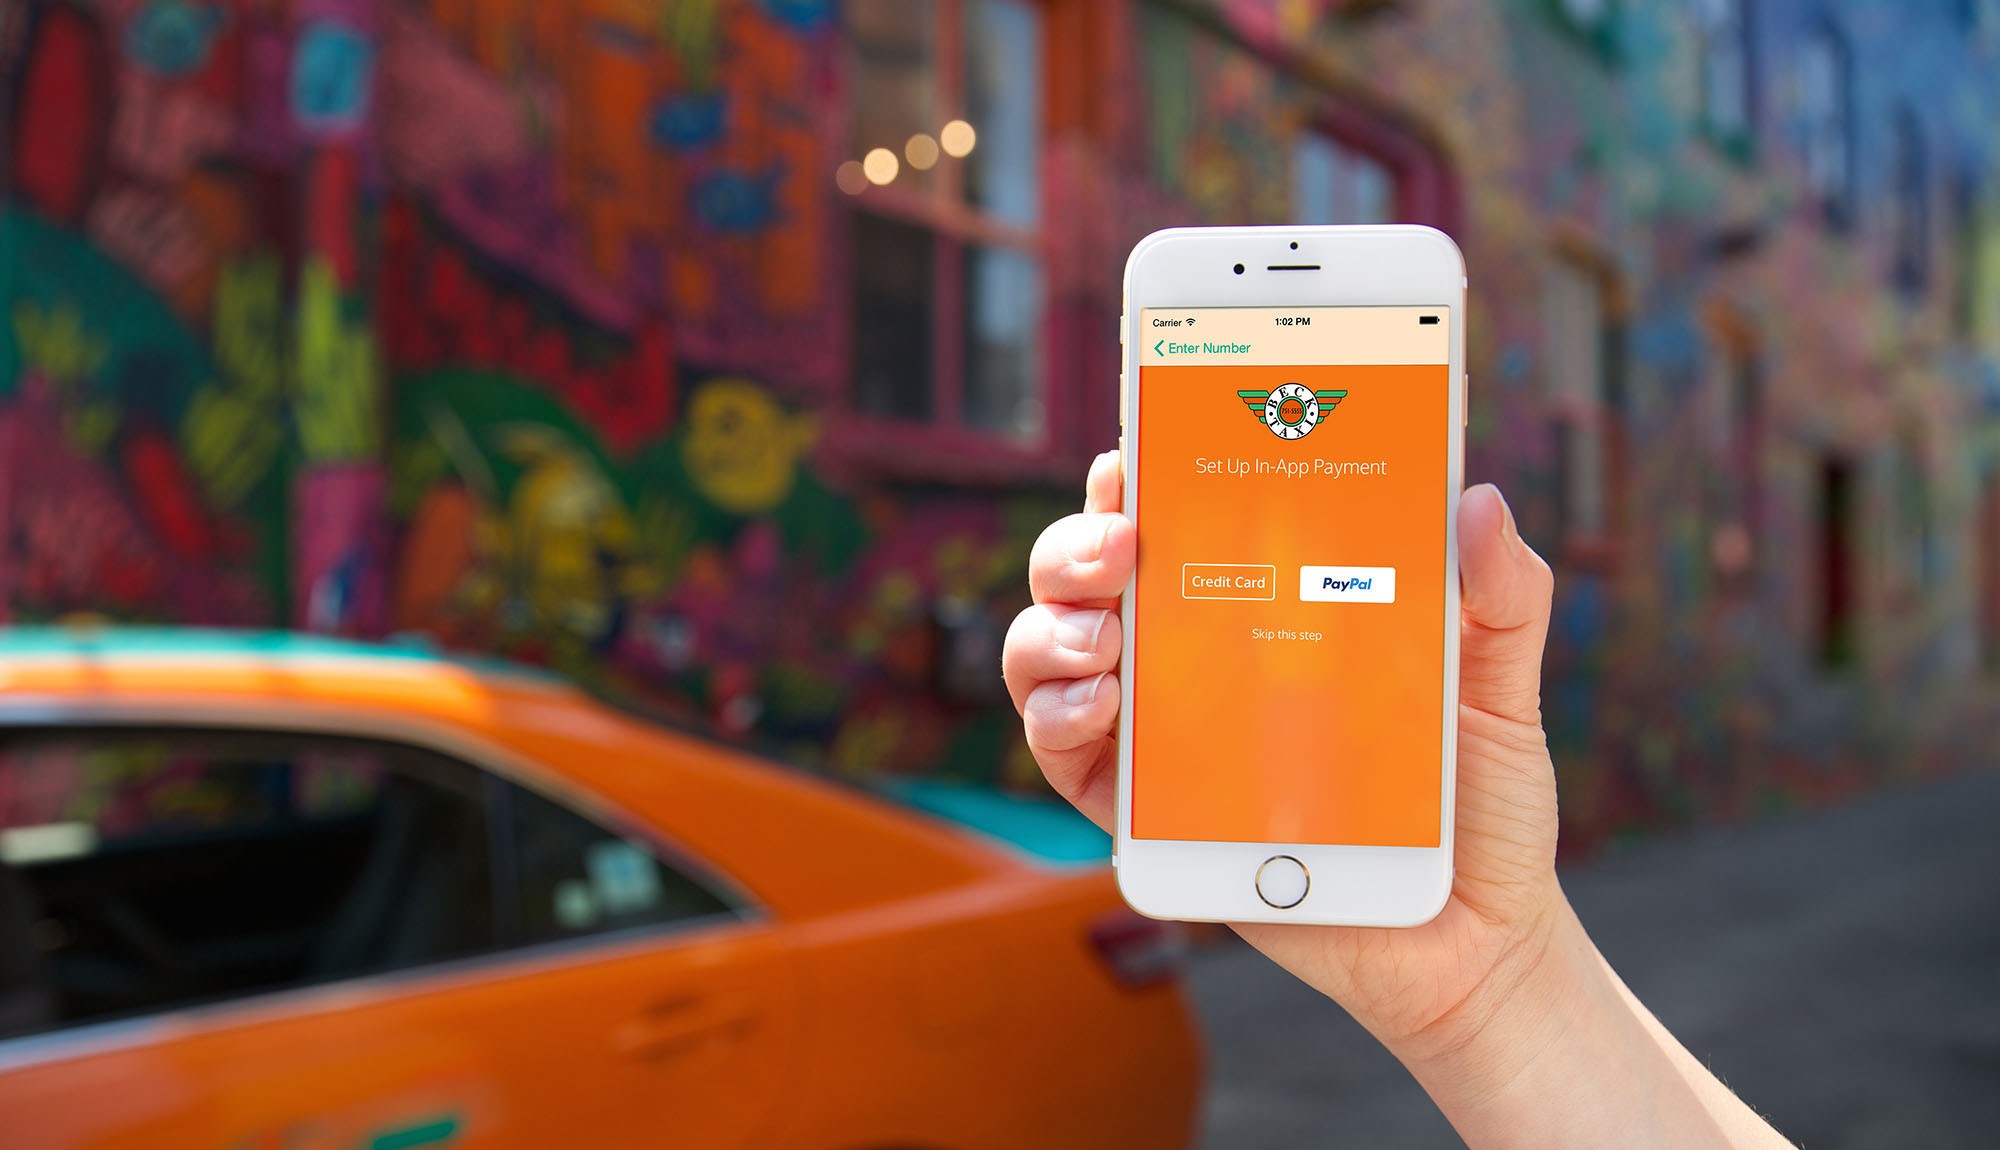 Beck Taxi In-App Payment Via PayPal and Credit Card